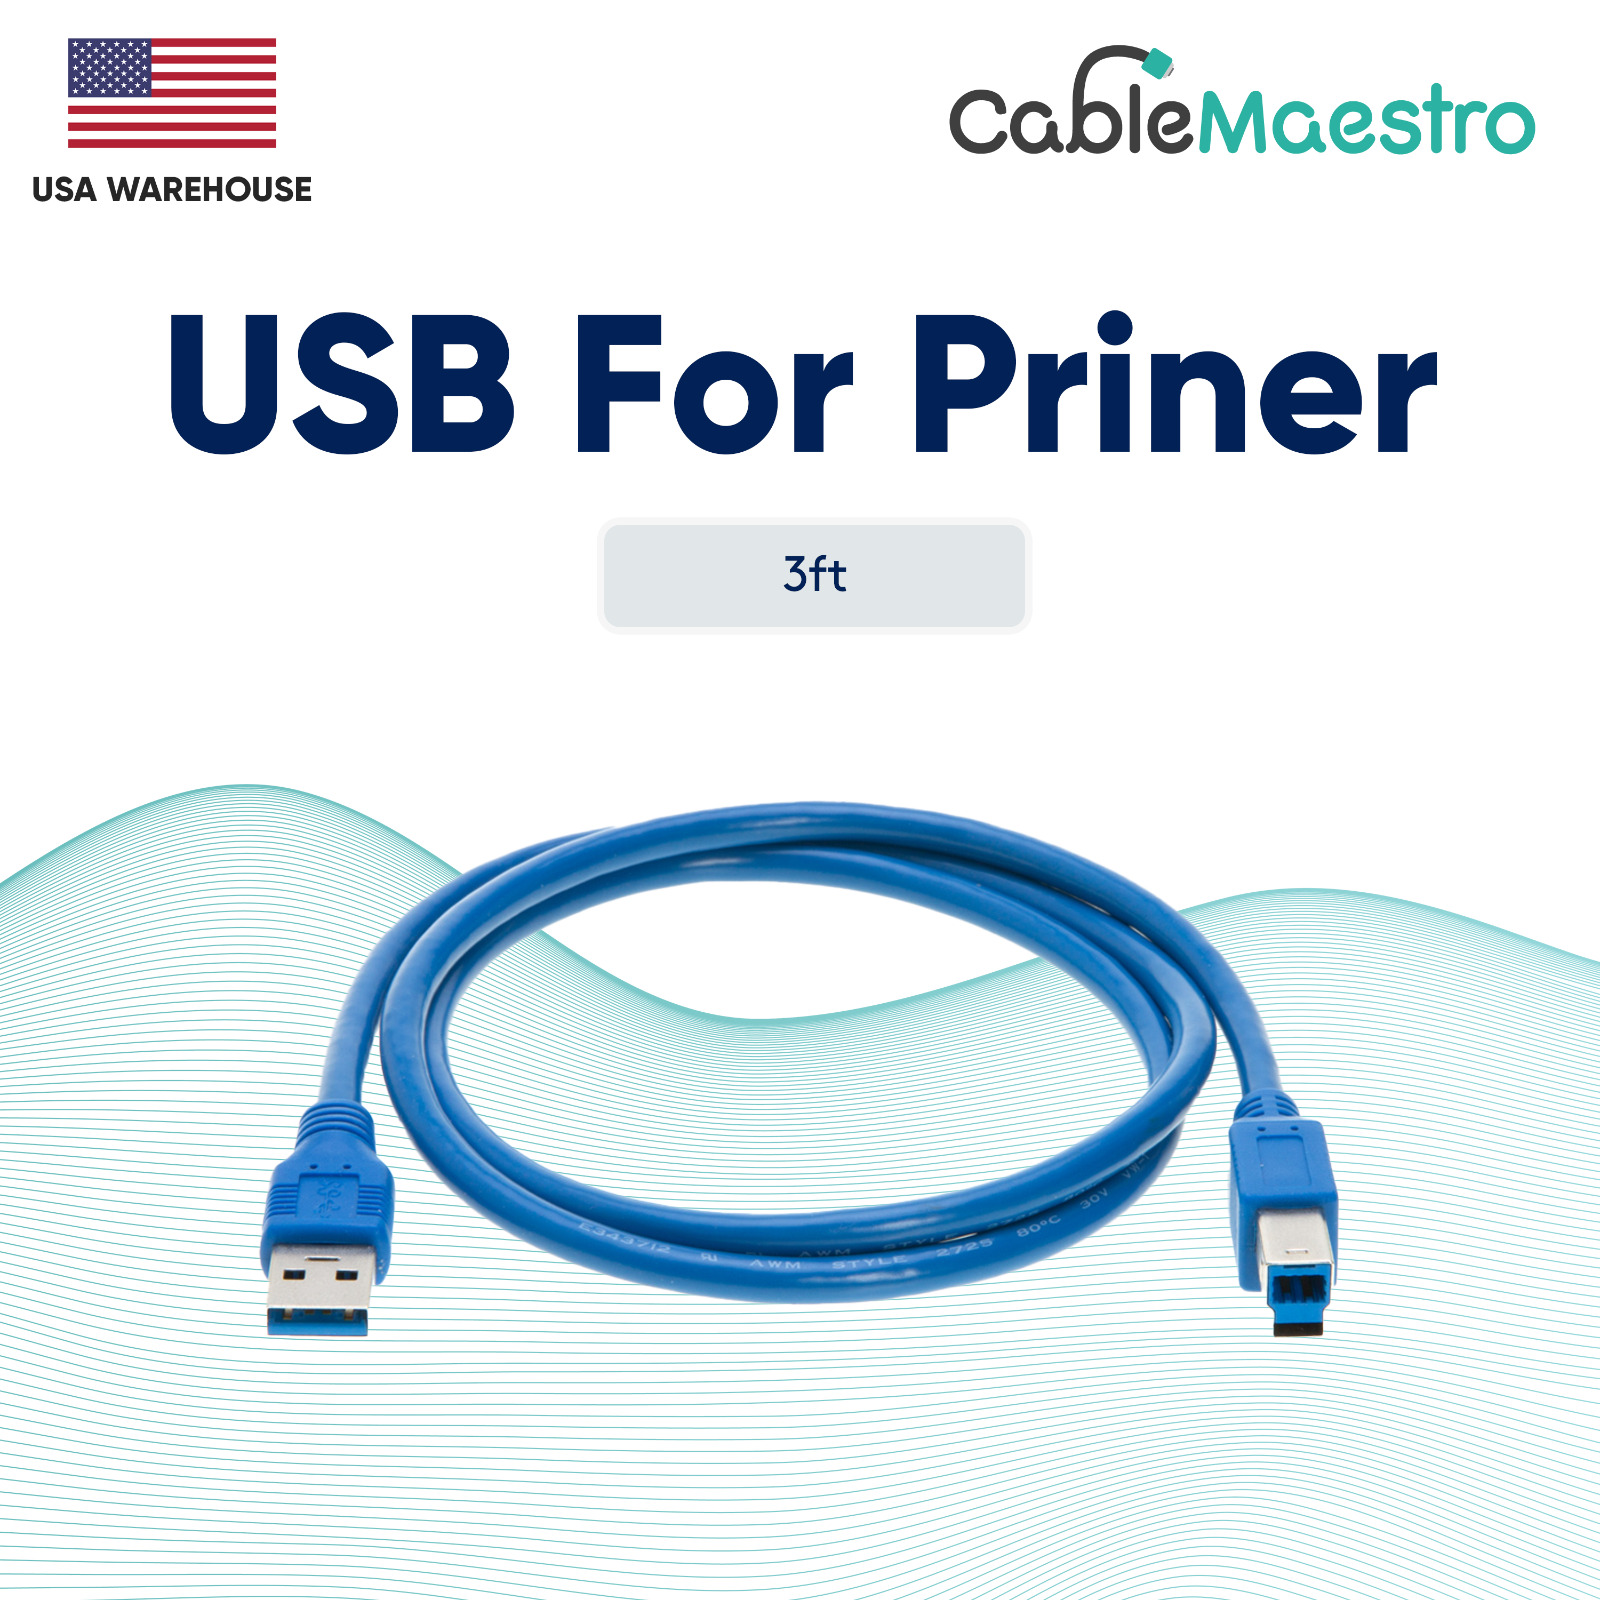 USB 3.0 Type B Printer Cable Scan Fast High Speed Print Drive Disk DAC HP Epson